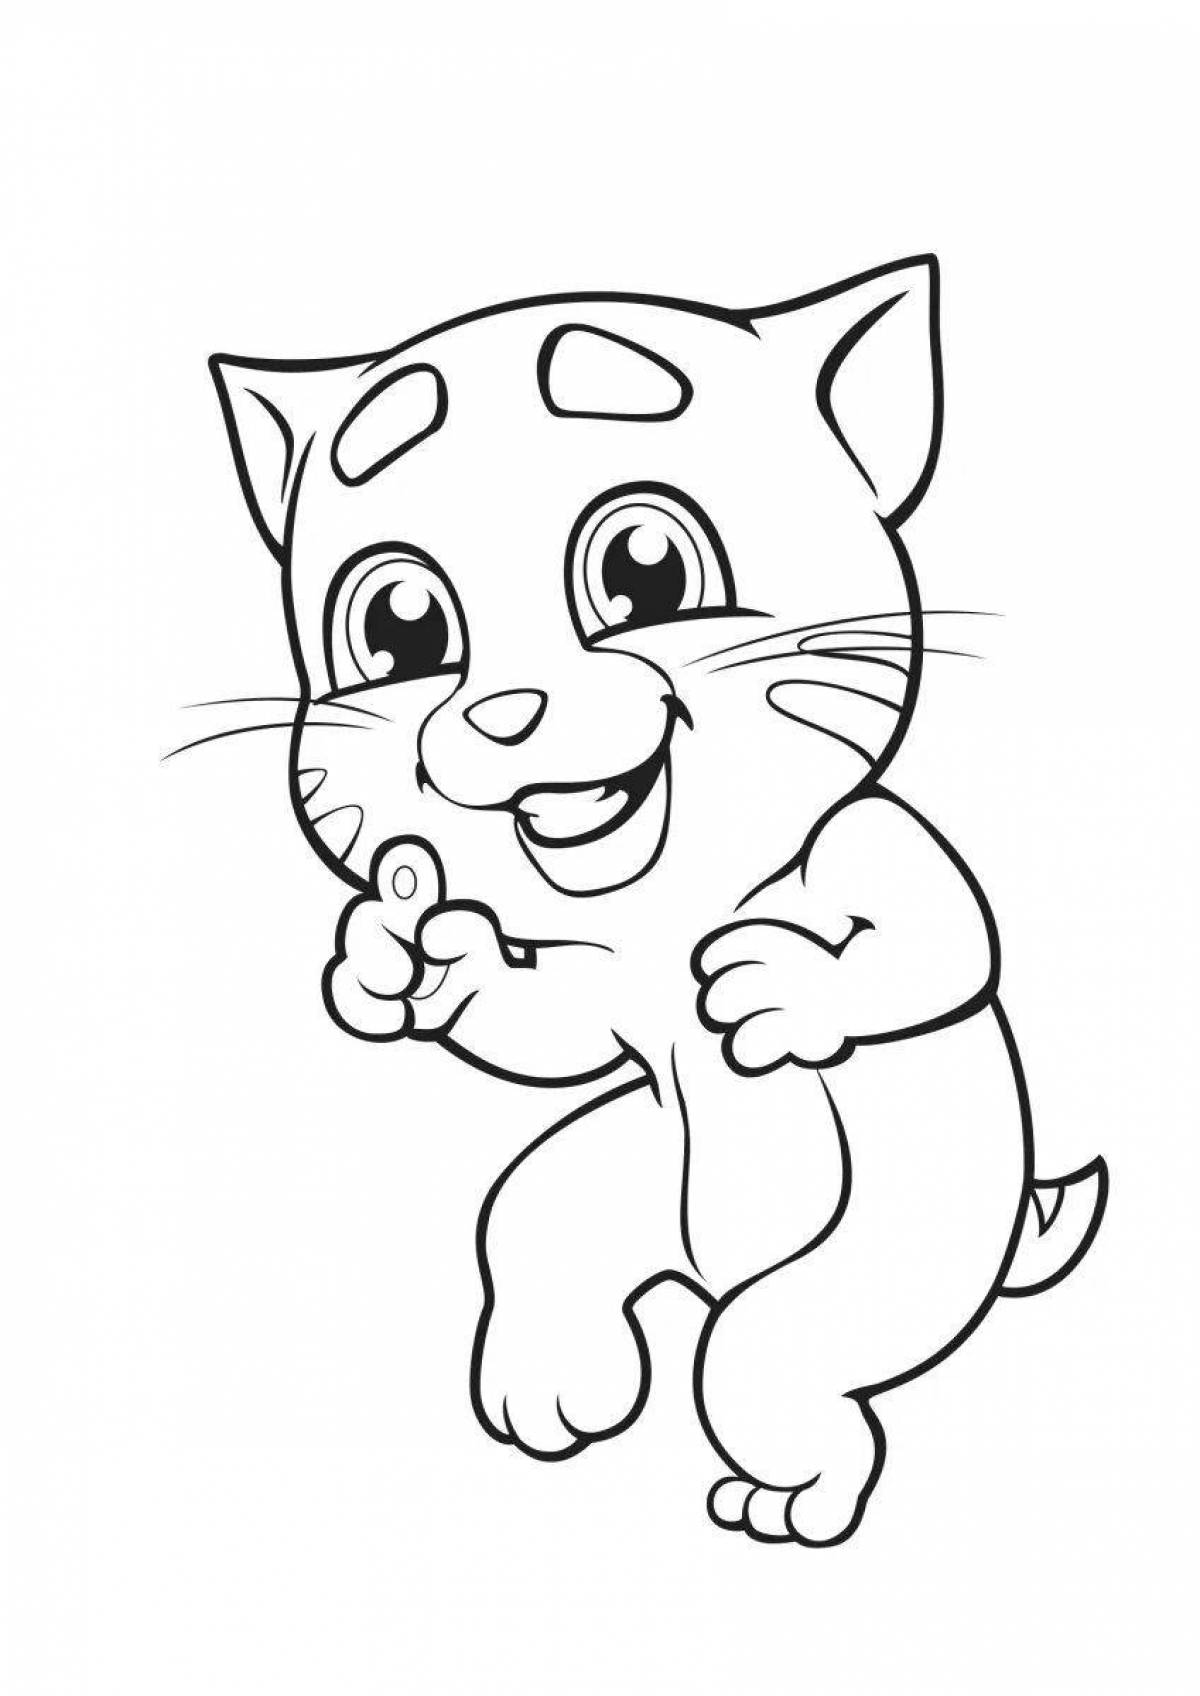 Attracting volume cat and angela coloring page